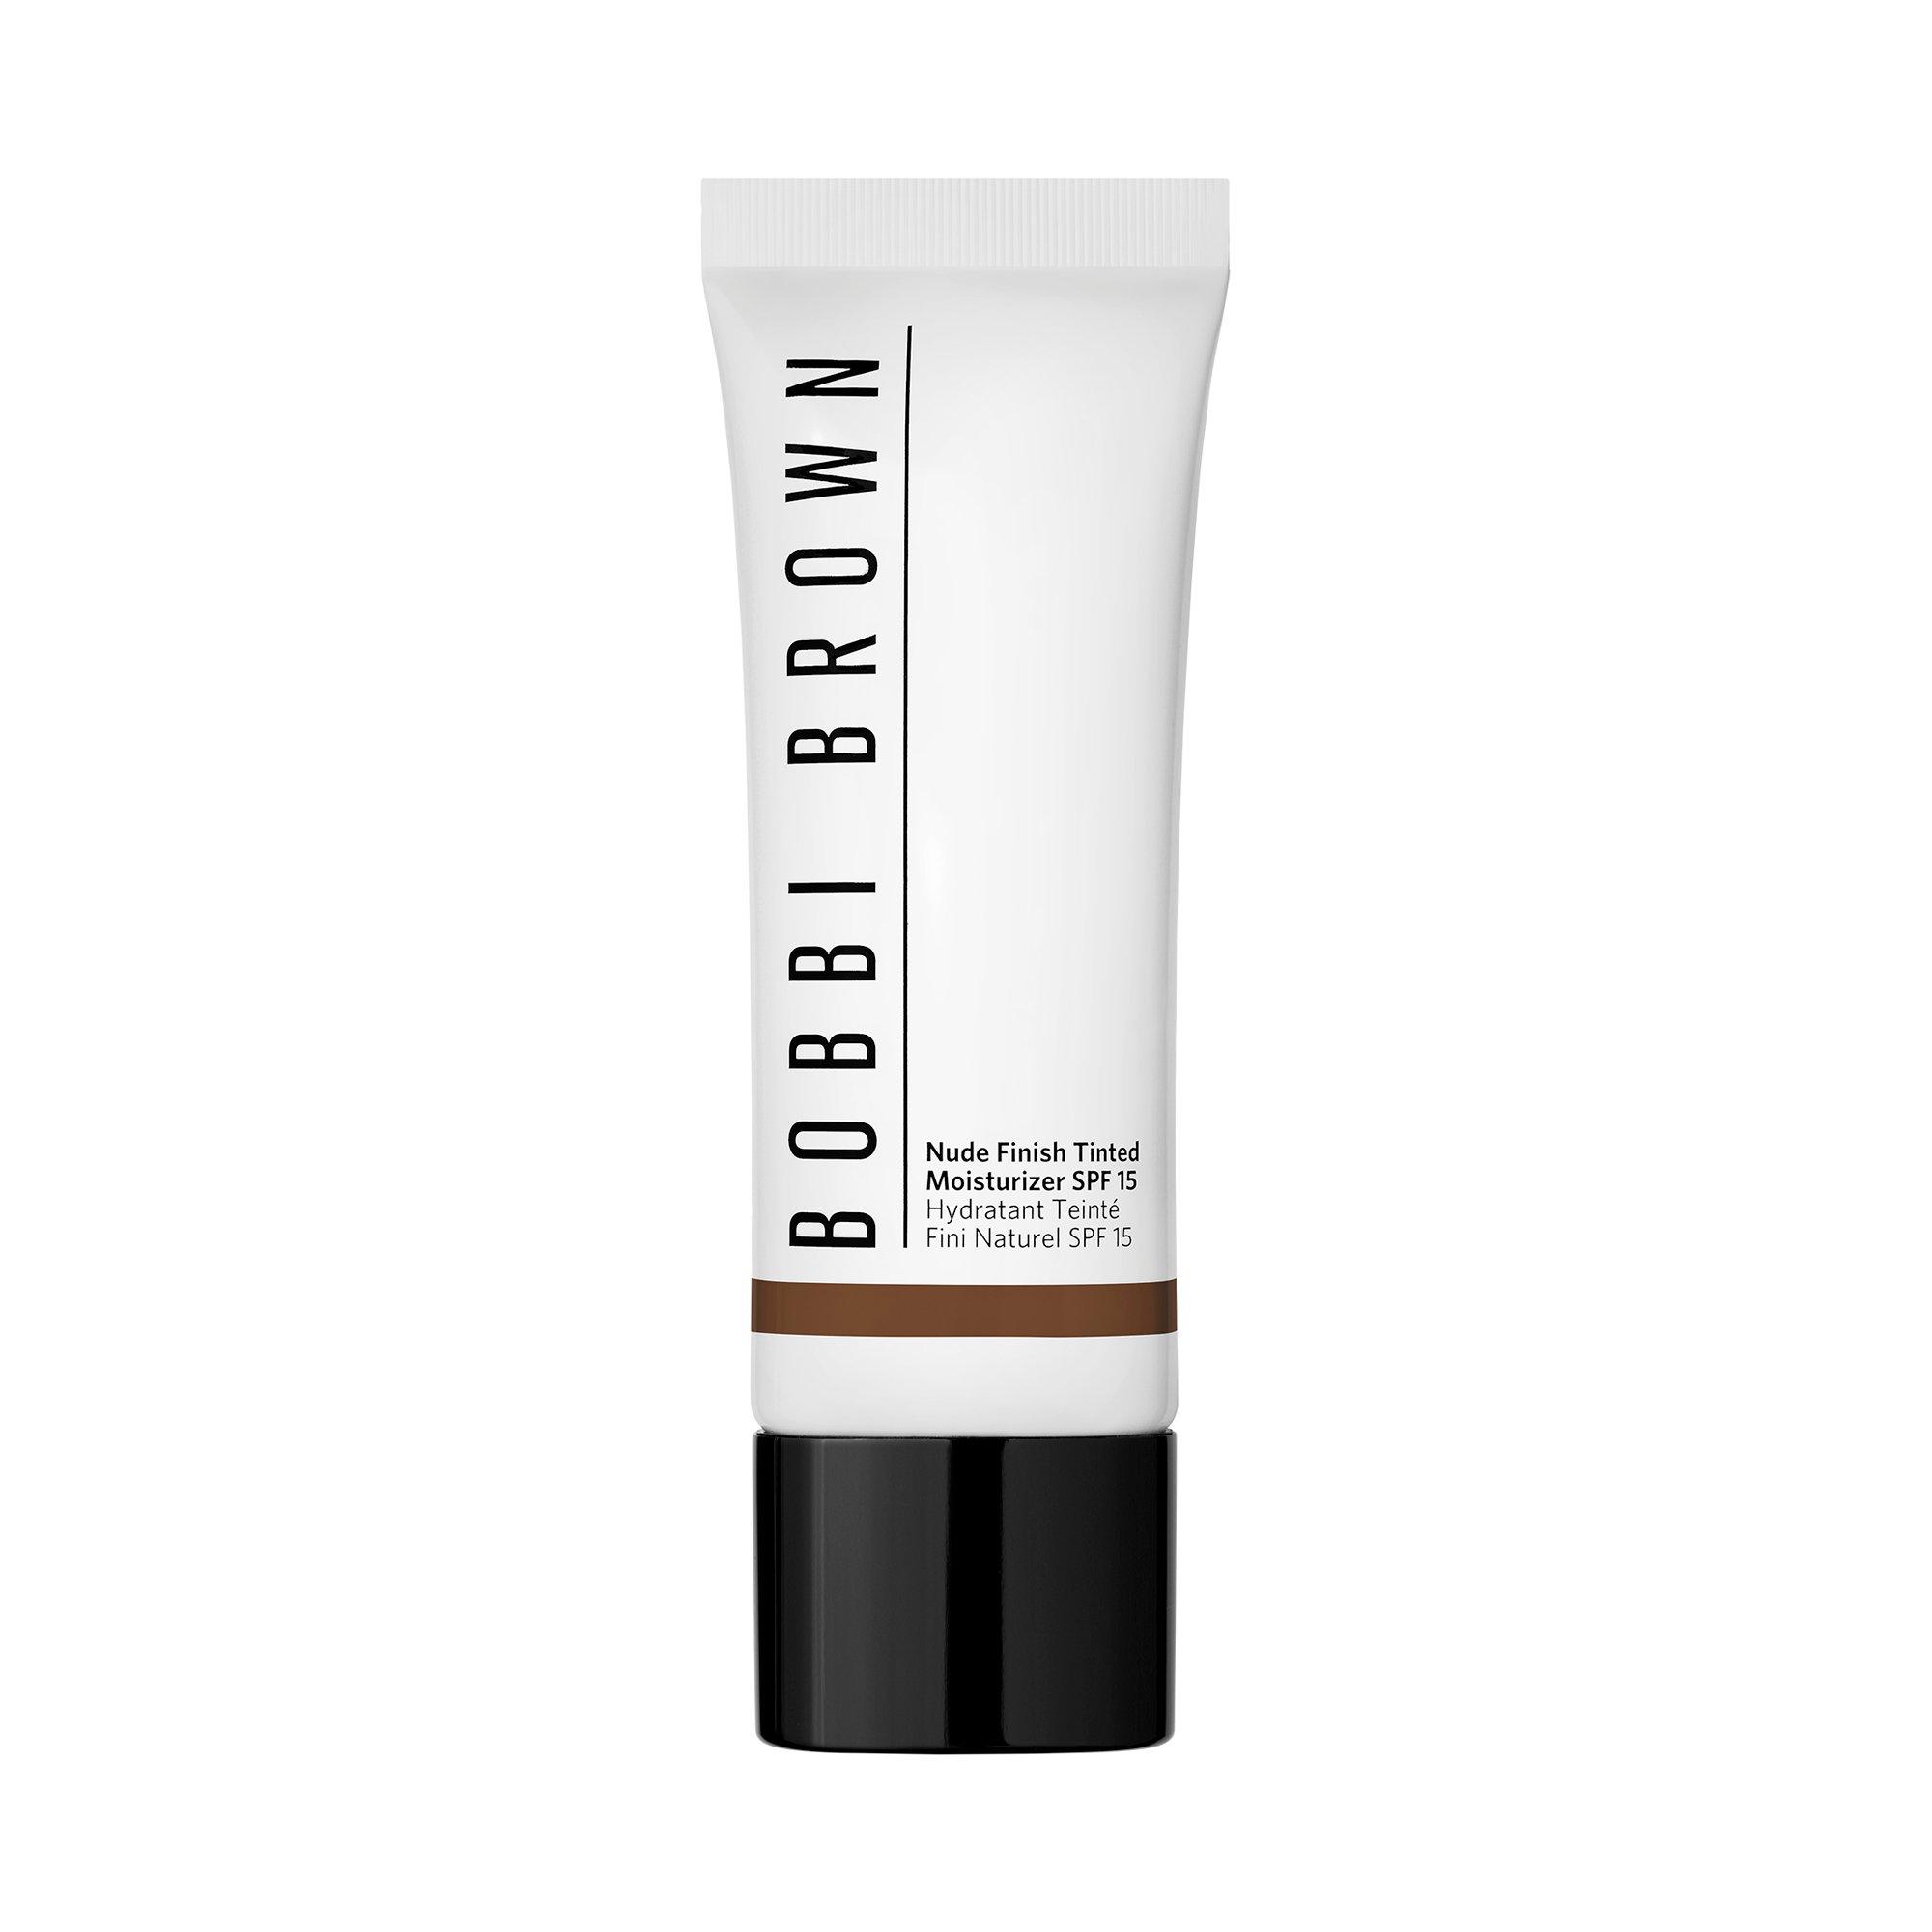 BB Weekend Glow Collection - Nude Finish Tinted Moisturizer SPF15 Rich Tint